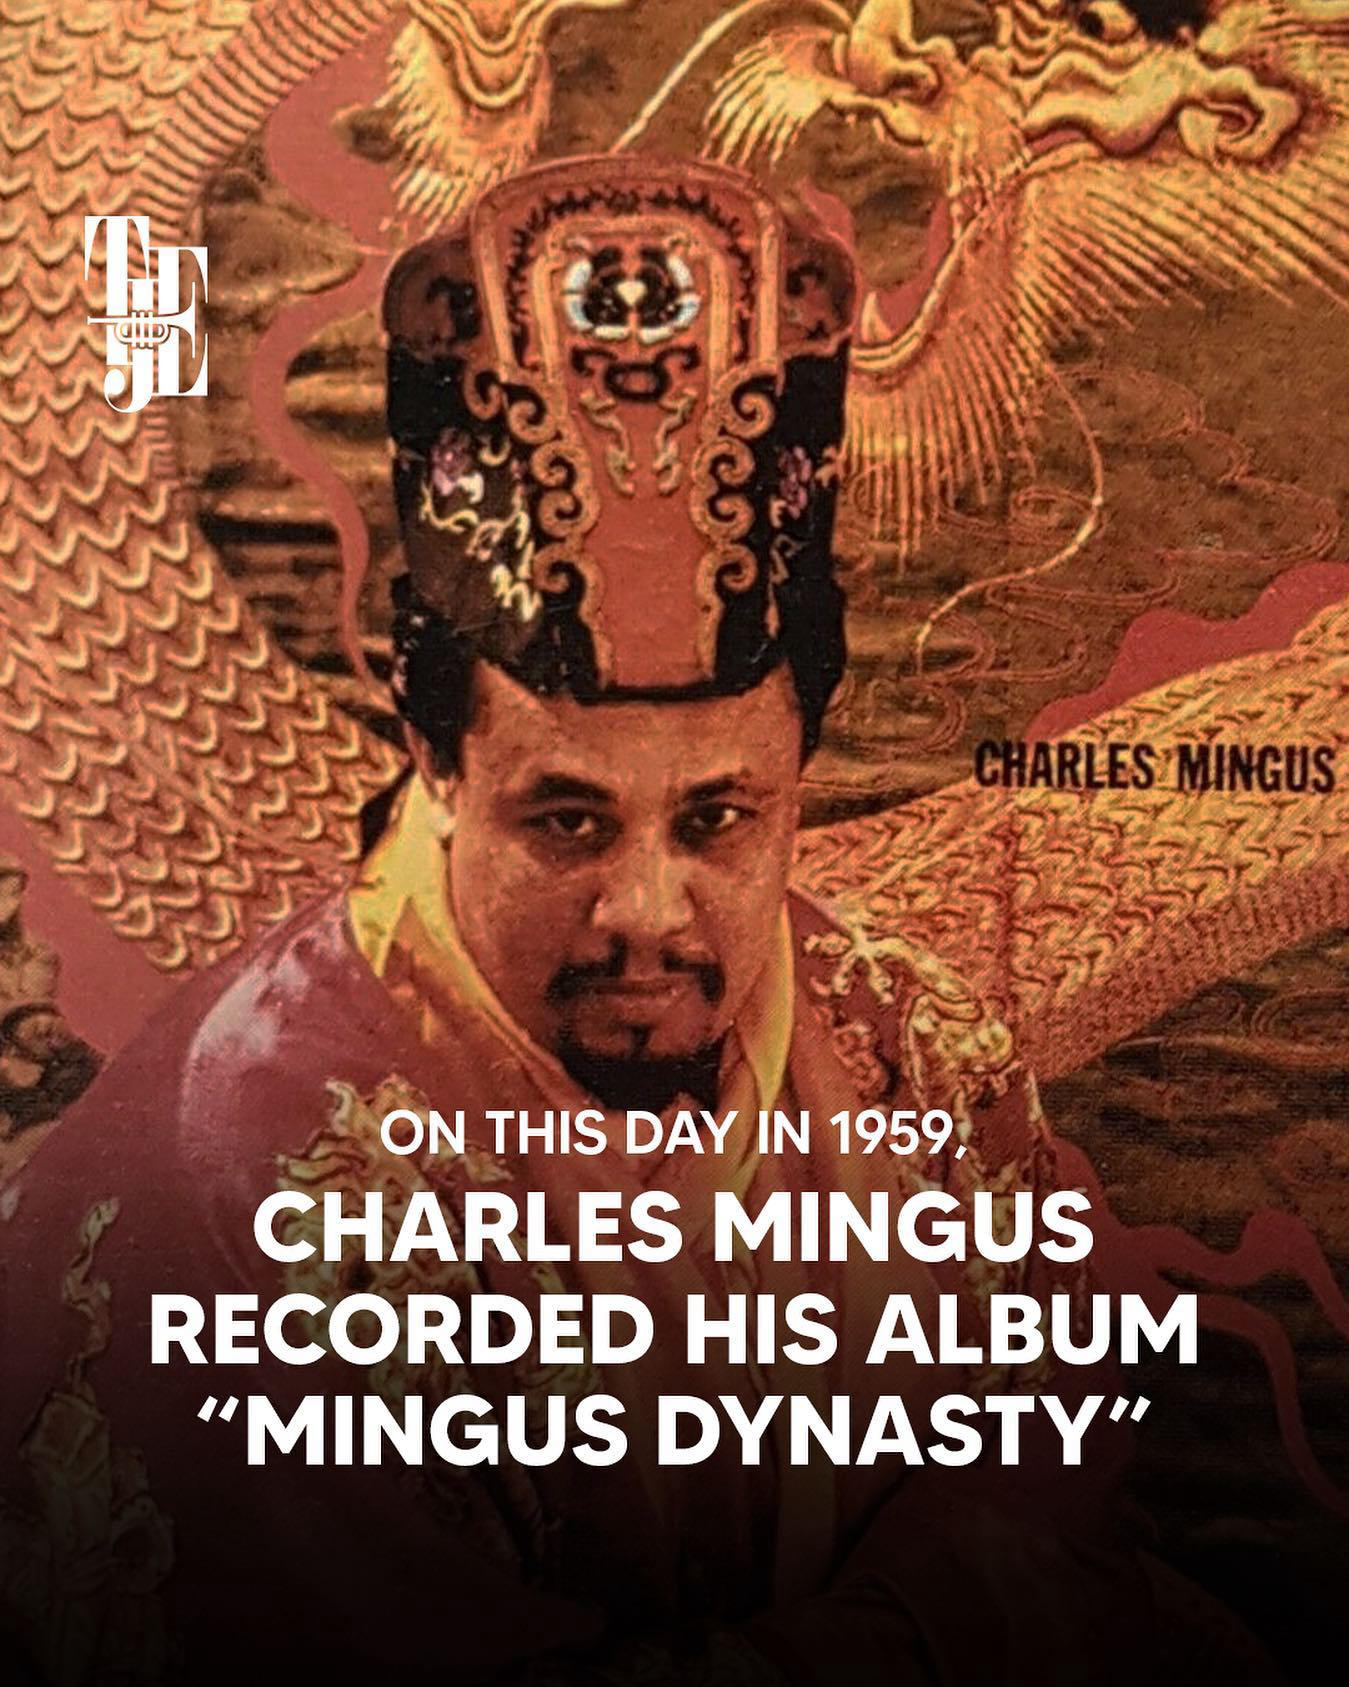 The Jazz Estate - On this day in 1959, bassist and composer Charles Mingus recorded his famous album